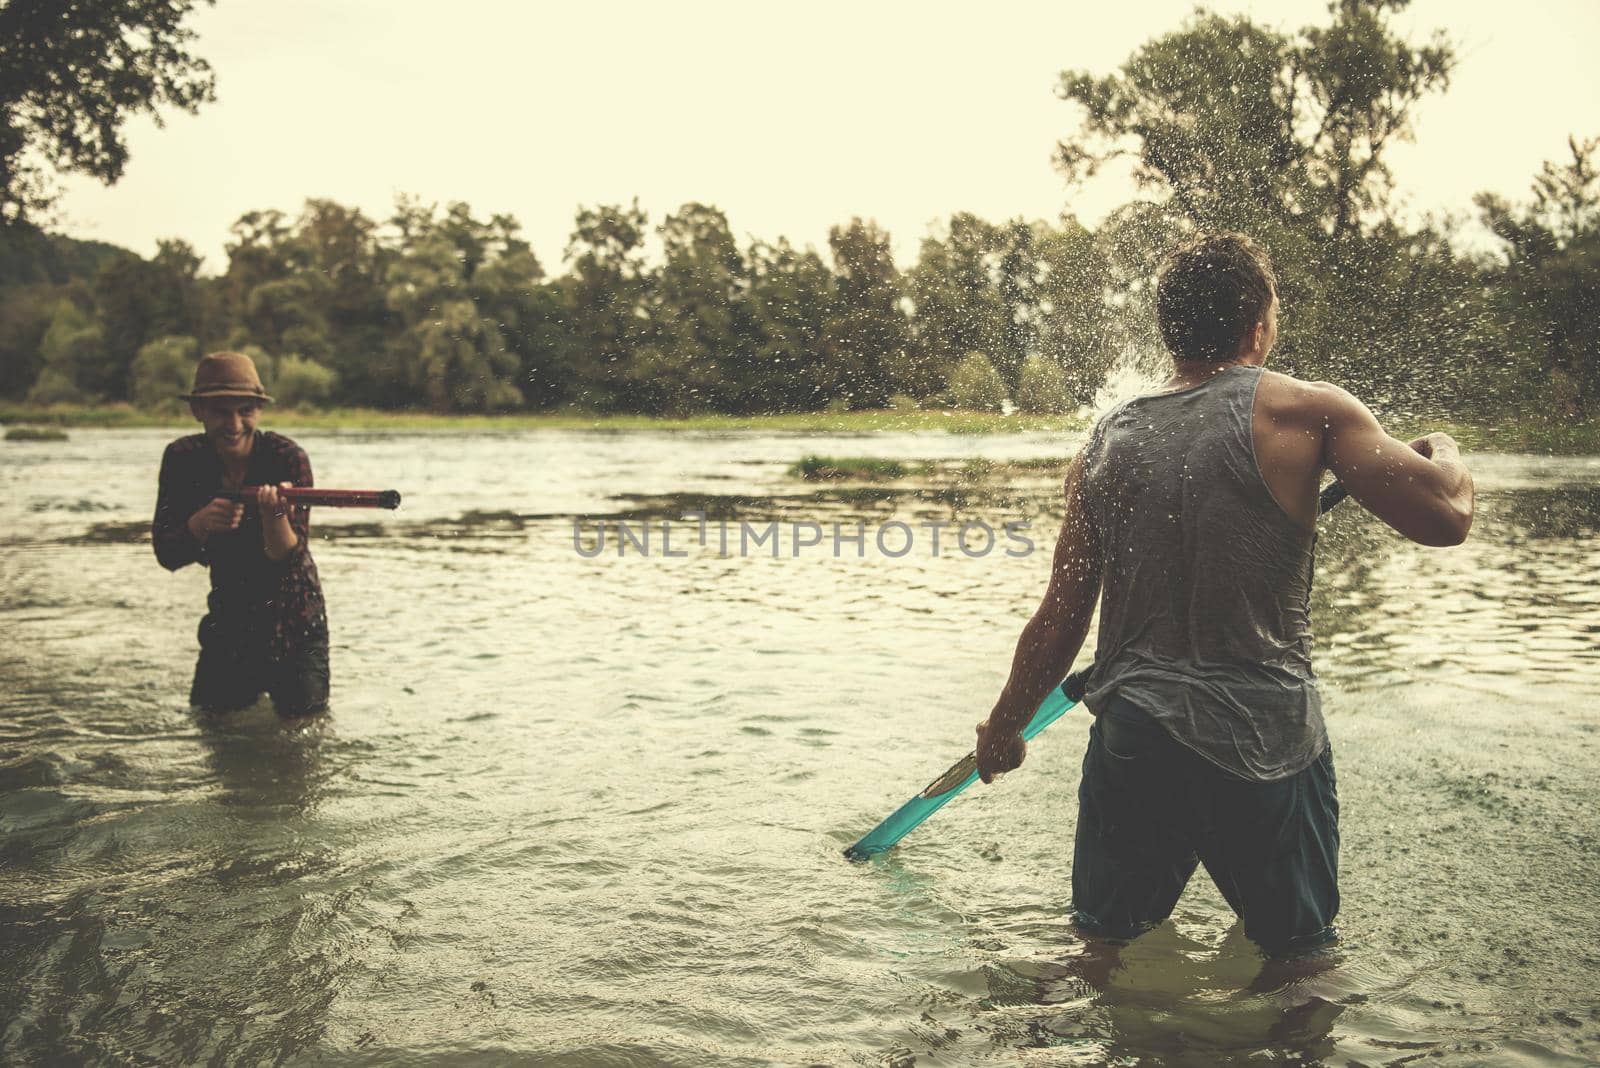 young men having fun with water guns while splashing  each other during sunset on the river